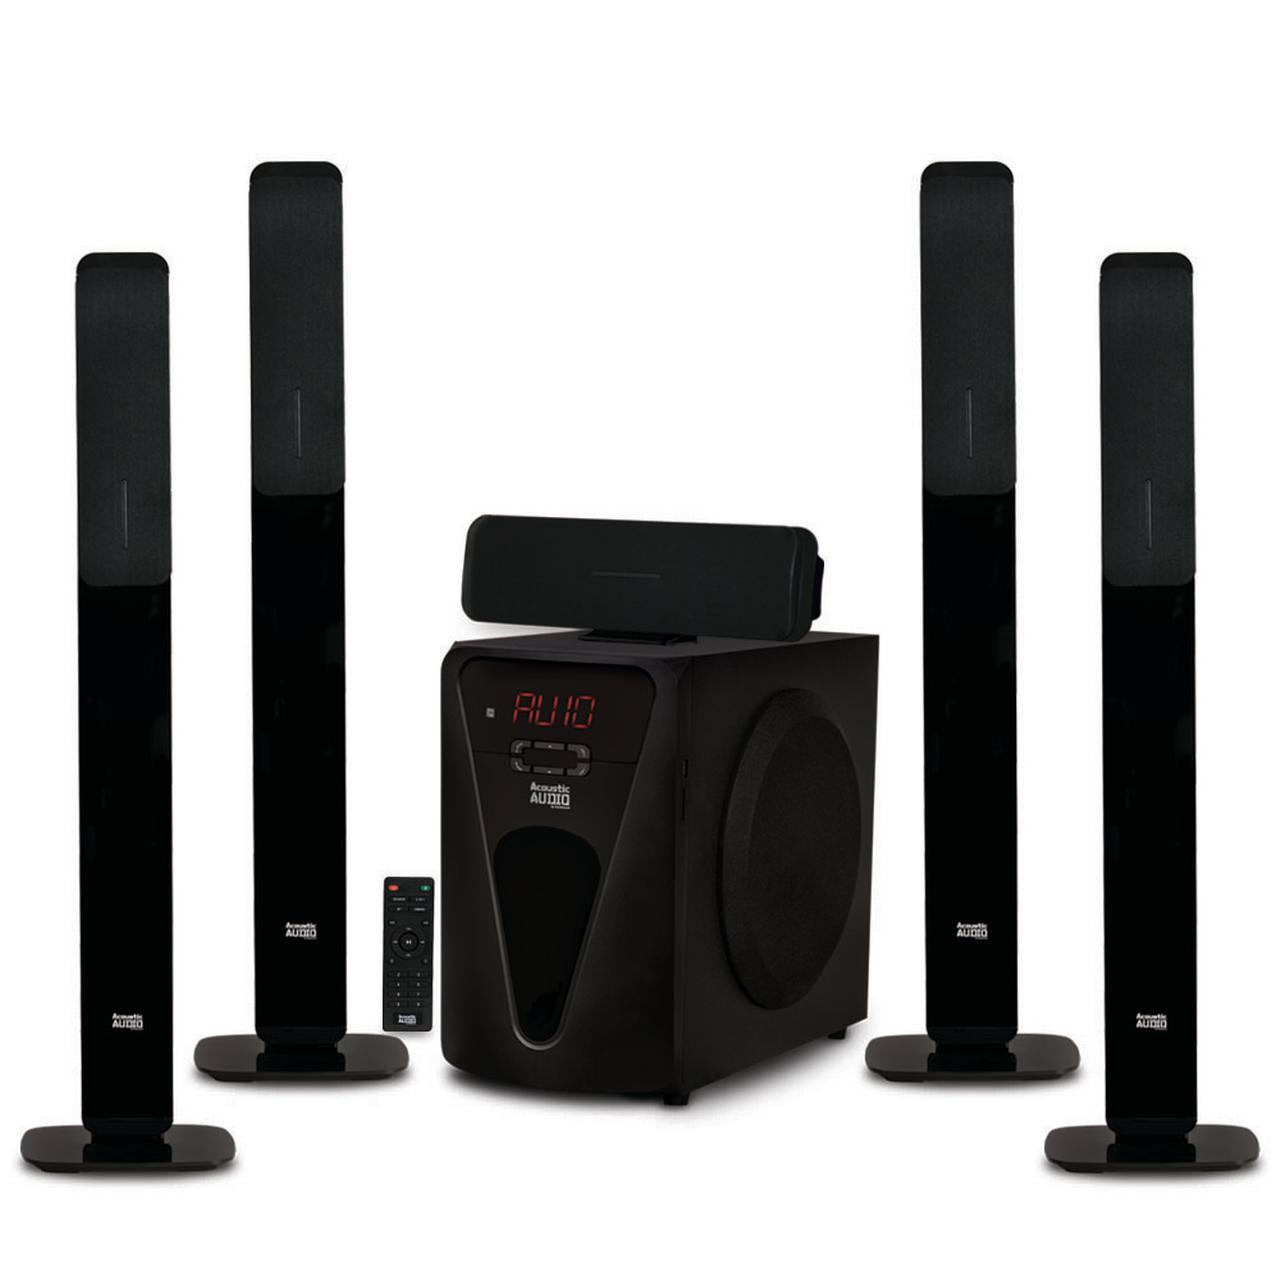 Acoustic Audio AAT5005 Bluetooth Tower 5.1 Home Theater Speaker System with Digital Optical Input and 8" Powered Subwoofer - image 1 of 6